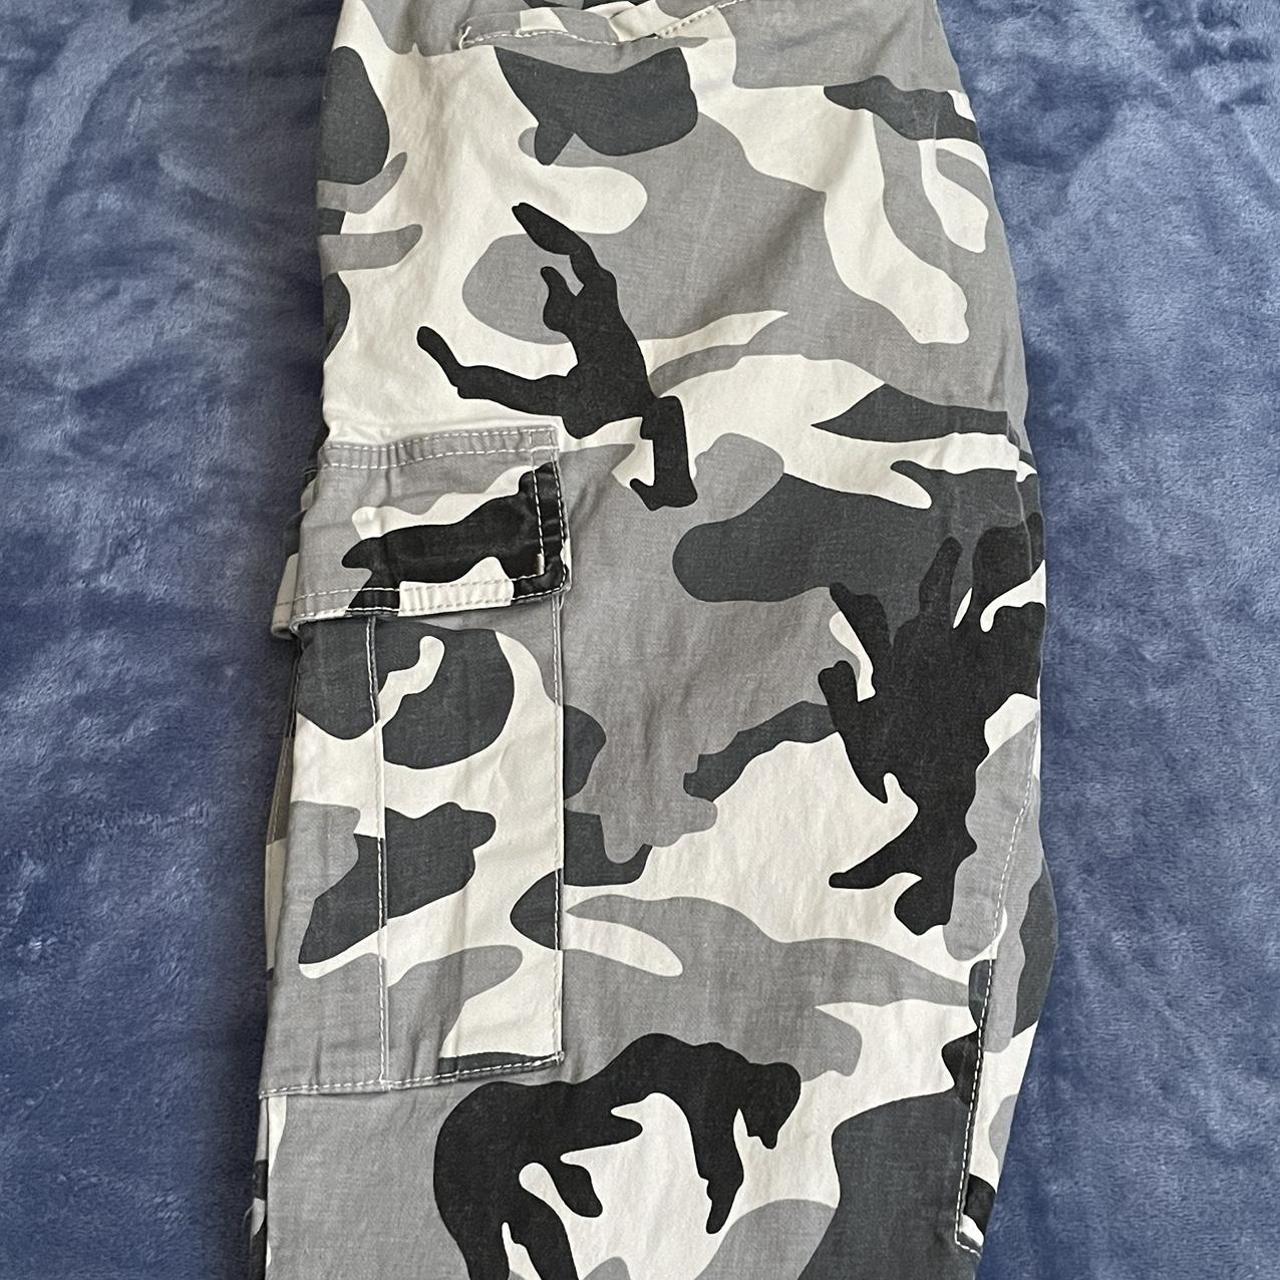 Grey Camo Stacked Cargos From Pacsun there is zipper... - Depop